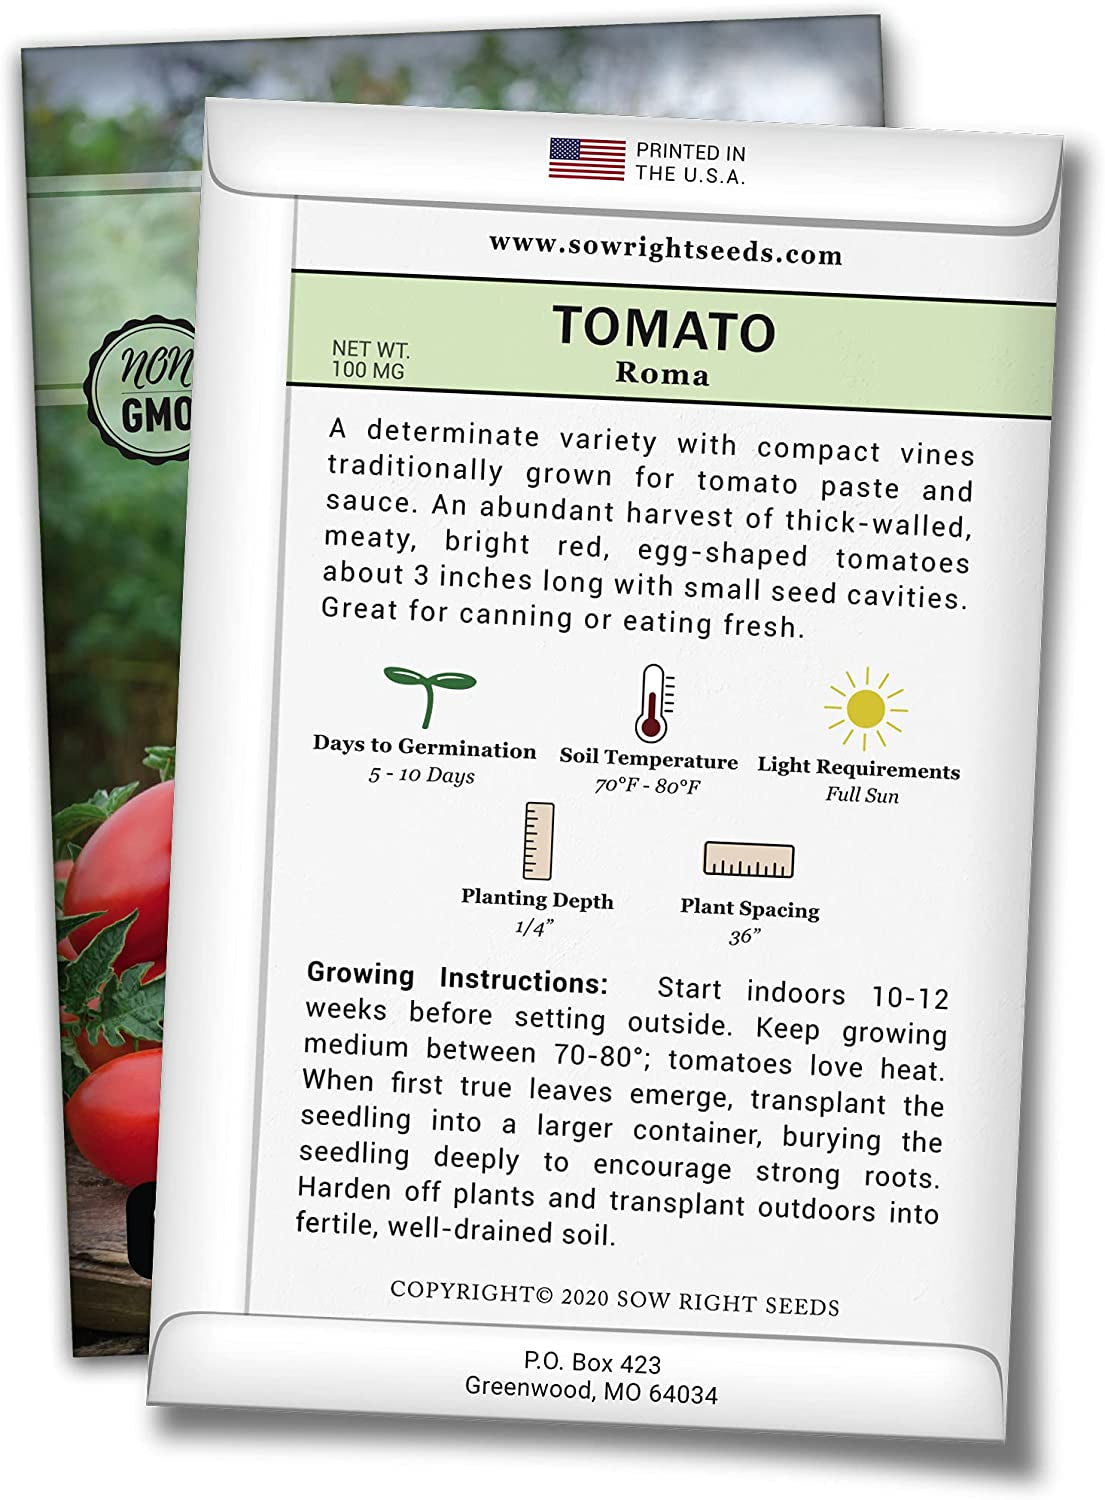 - Roma Tomato Seeds for Planting - Non-Gmo Heirloom Packet with Instructions to Plant a Home Vegetable Garden - Classic Medium Red Tomato - Great for Sauce Making (1)